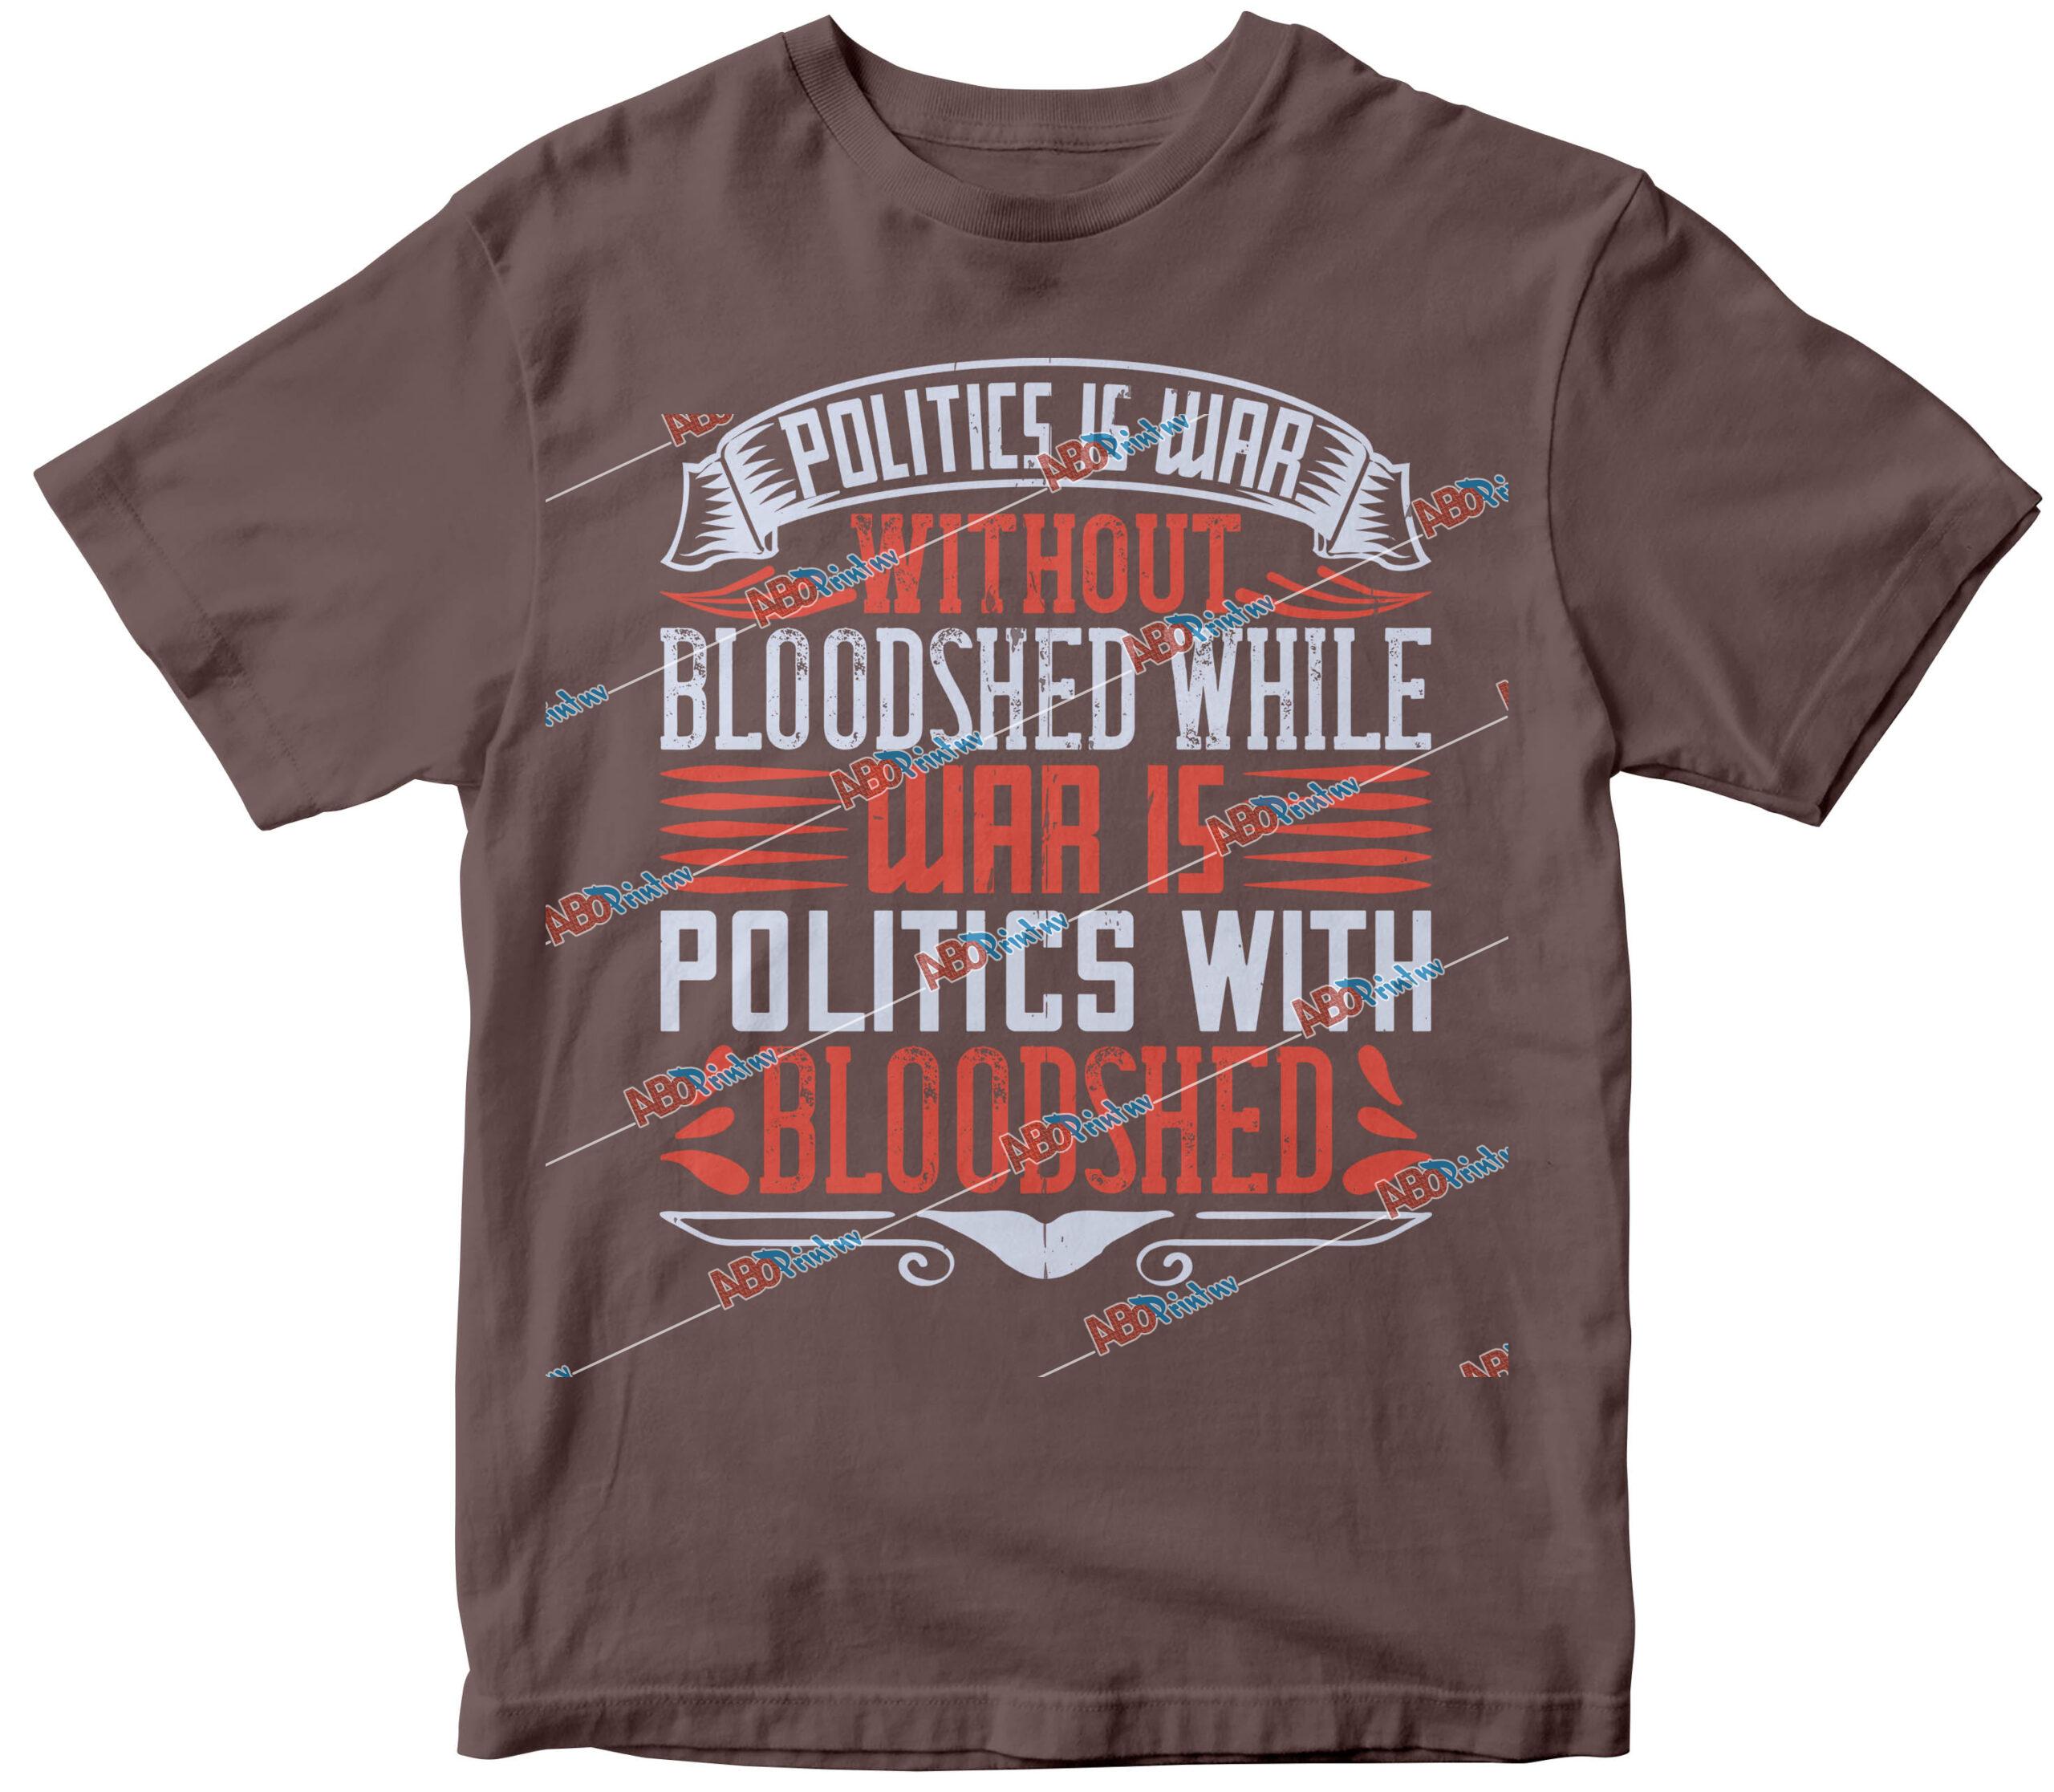 Politics is war without bloodshed while war is politics with bloodshed.jpg